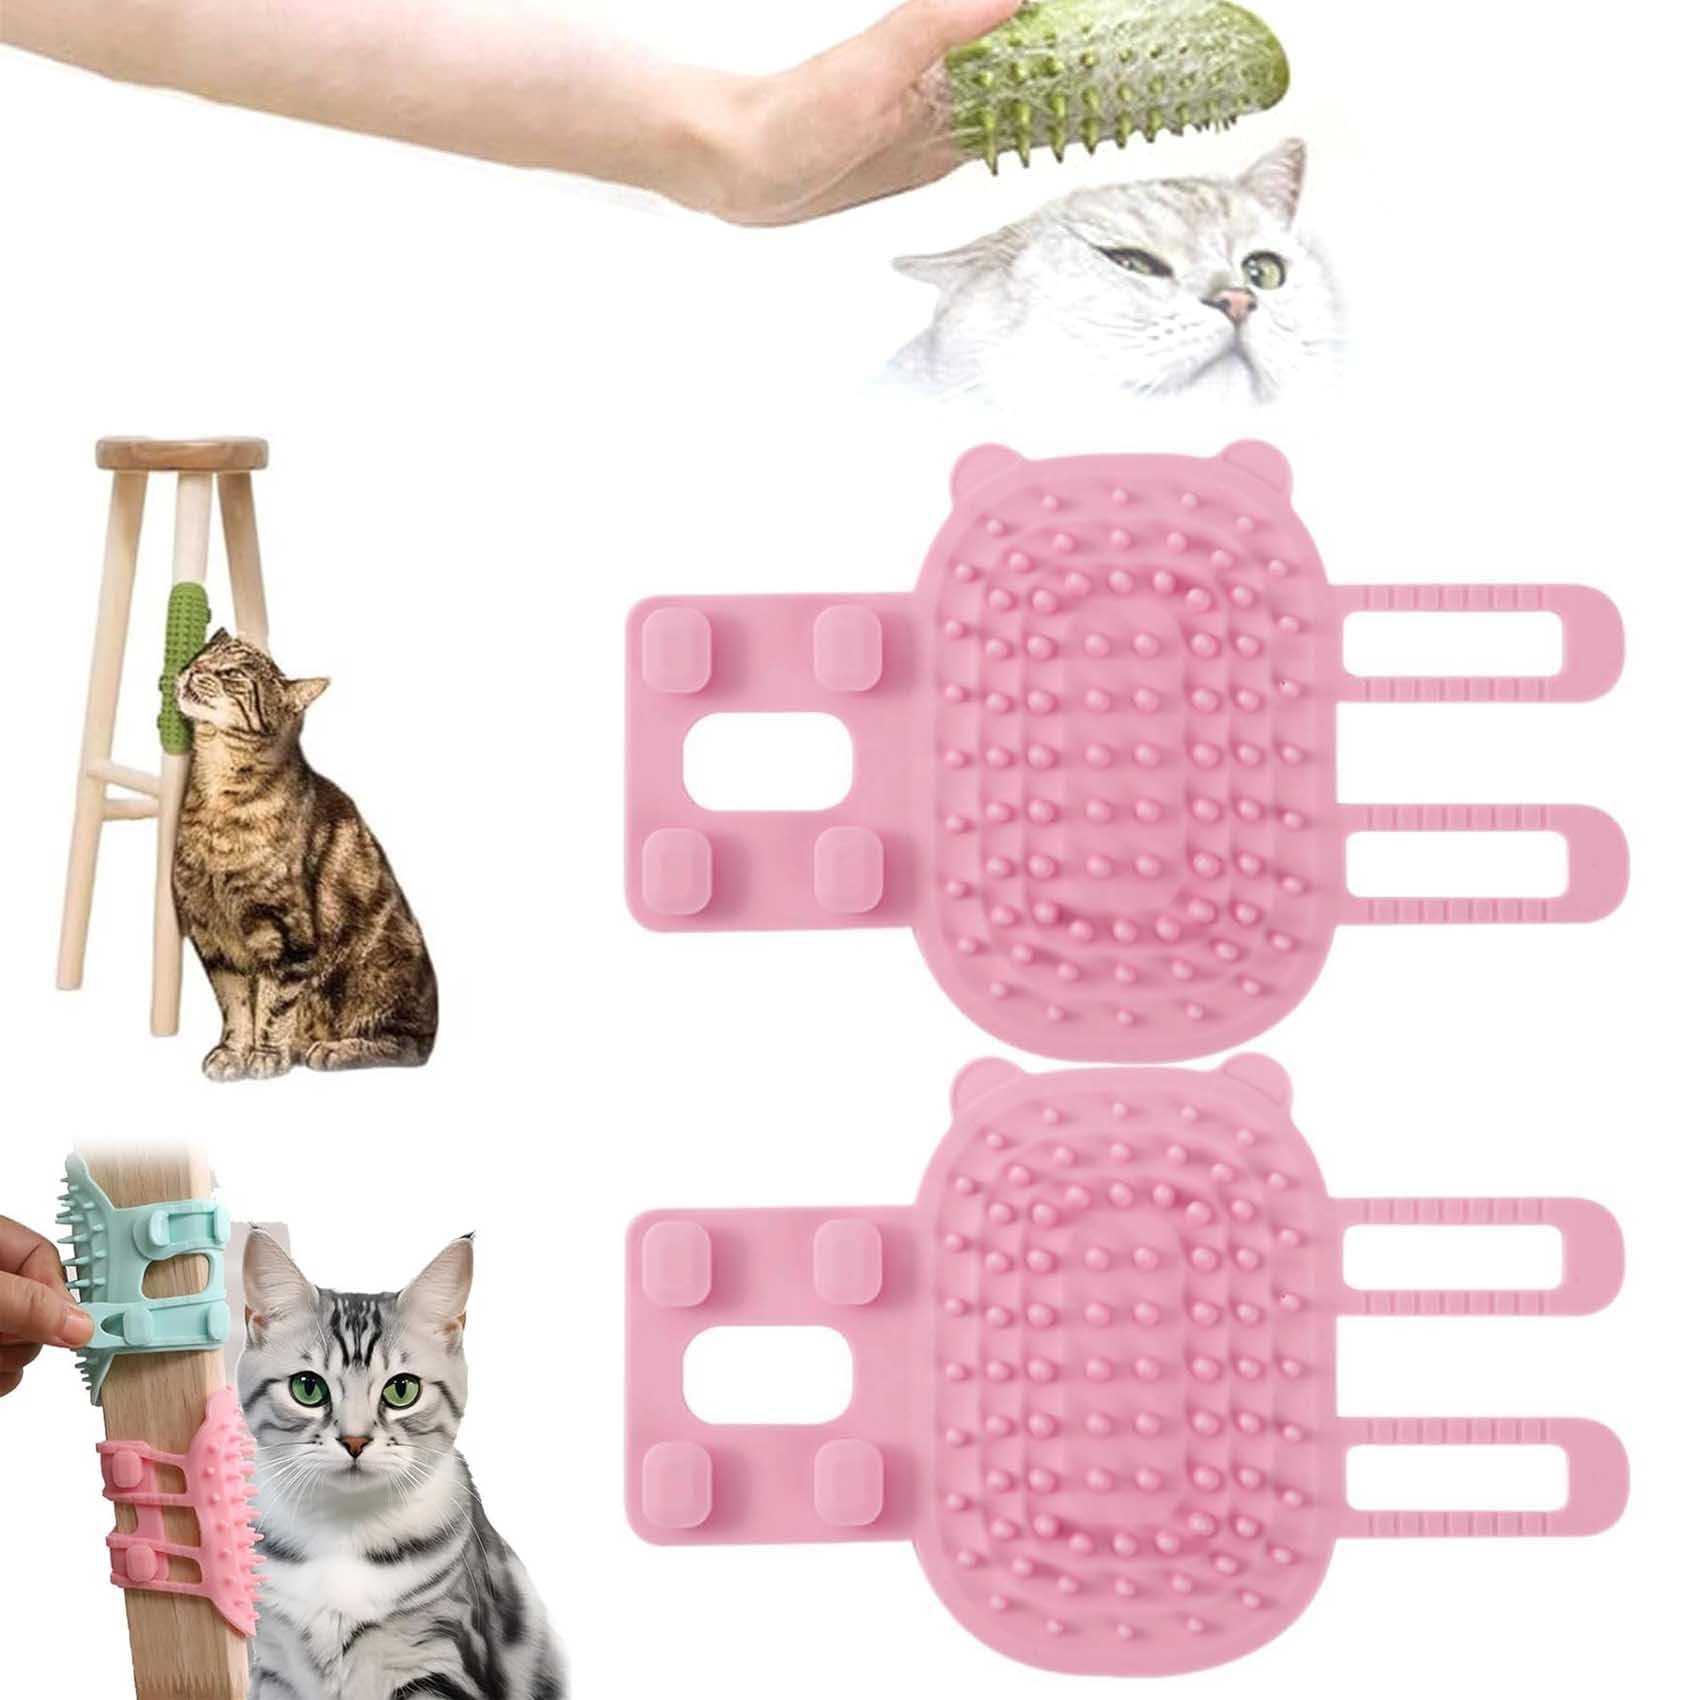 Pet Tickling Artifact, 2024 New Tickling Comb Pet Brush, Pet Itch Tool with 63 Round-Head Comb Teeth,Pet Back Scratcher for Chair Legs Table Leg,Silicone Pet Itch Rub Tool for Cats Dogs (2pc,Pink)